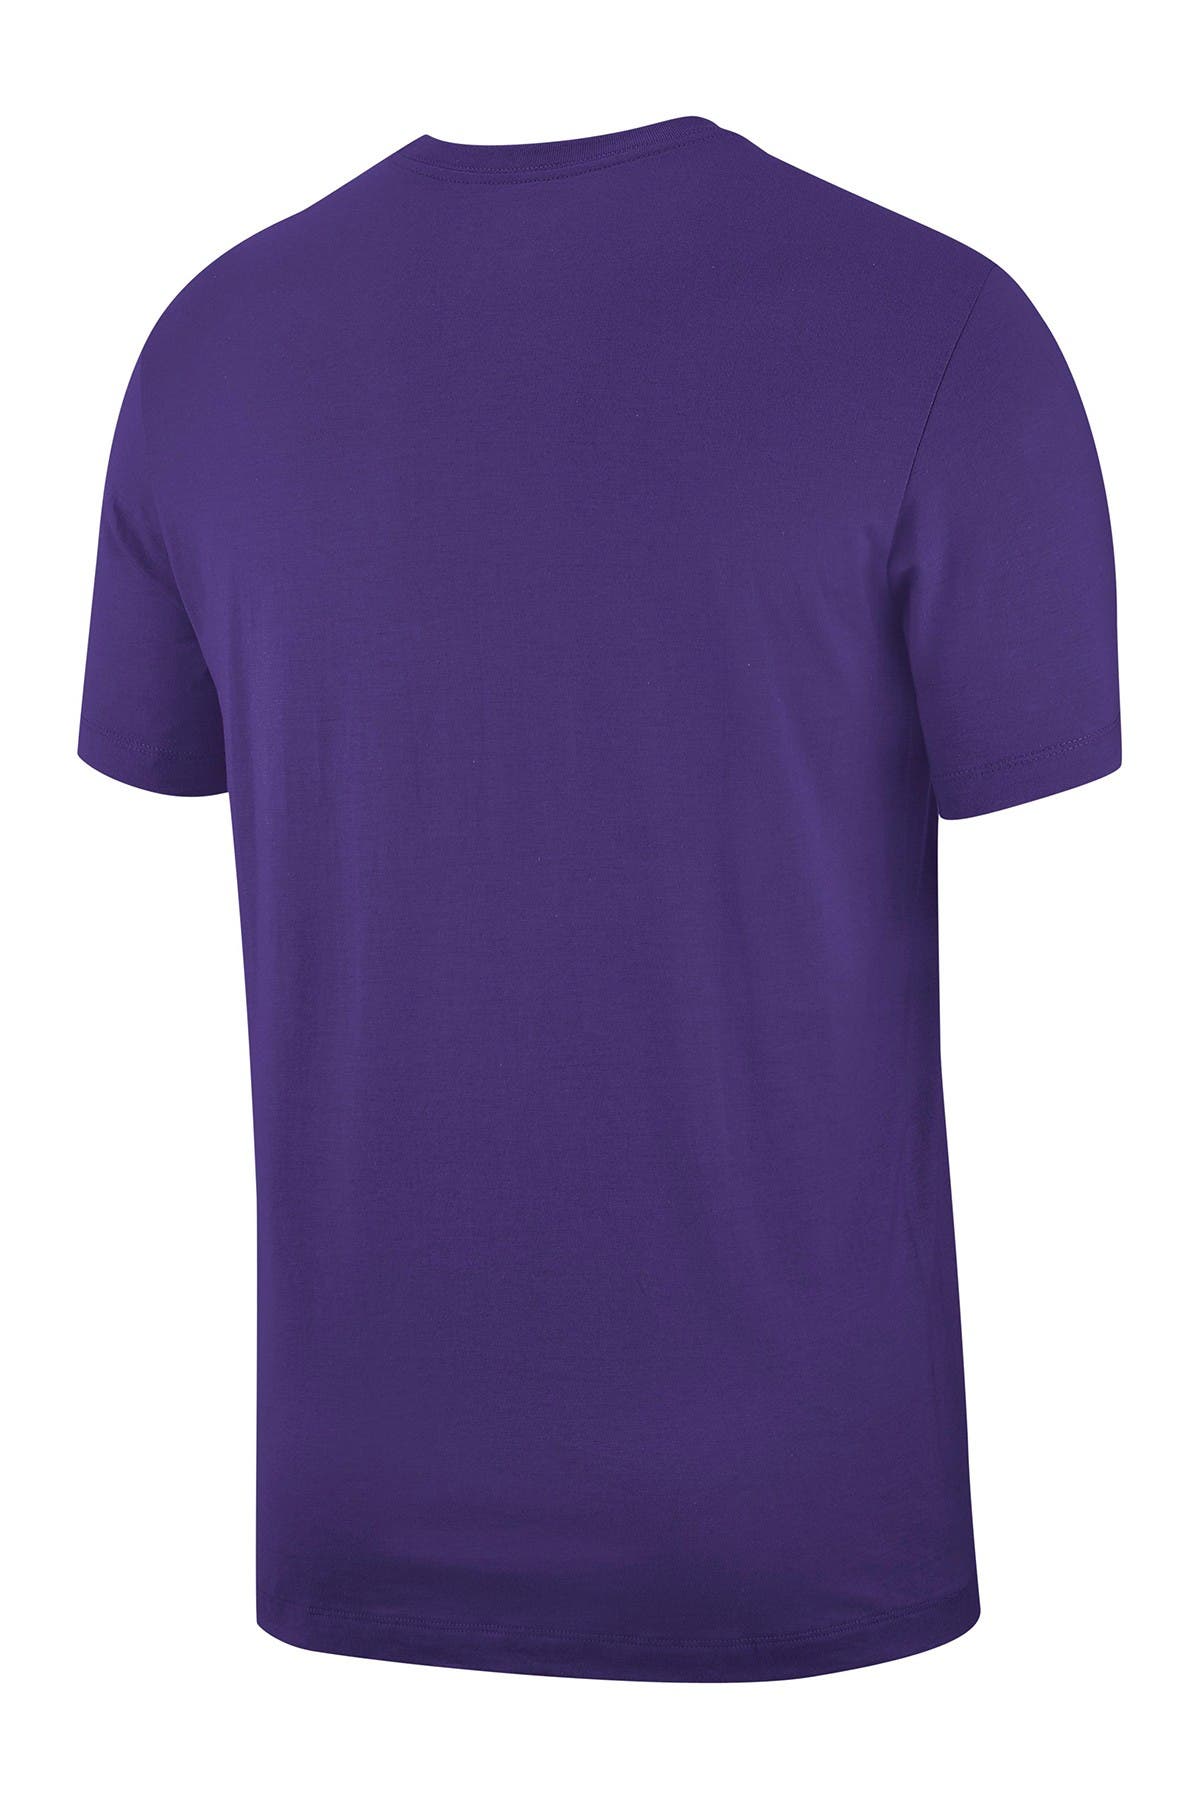 Nike Just Do It Swoosh Graphic T-shirt In 547 Ctpurp/white